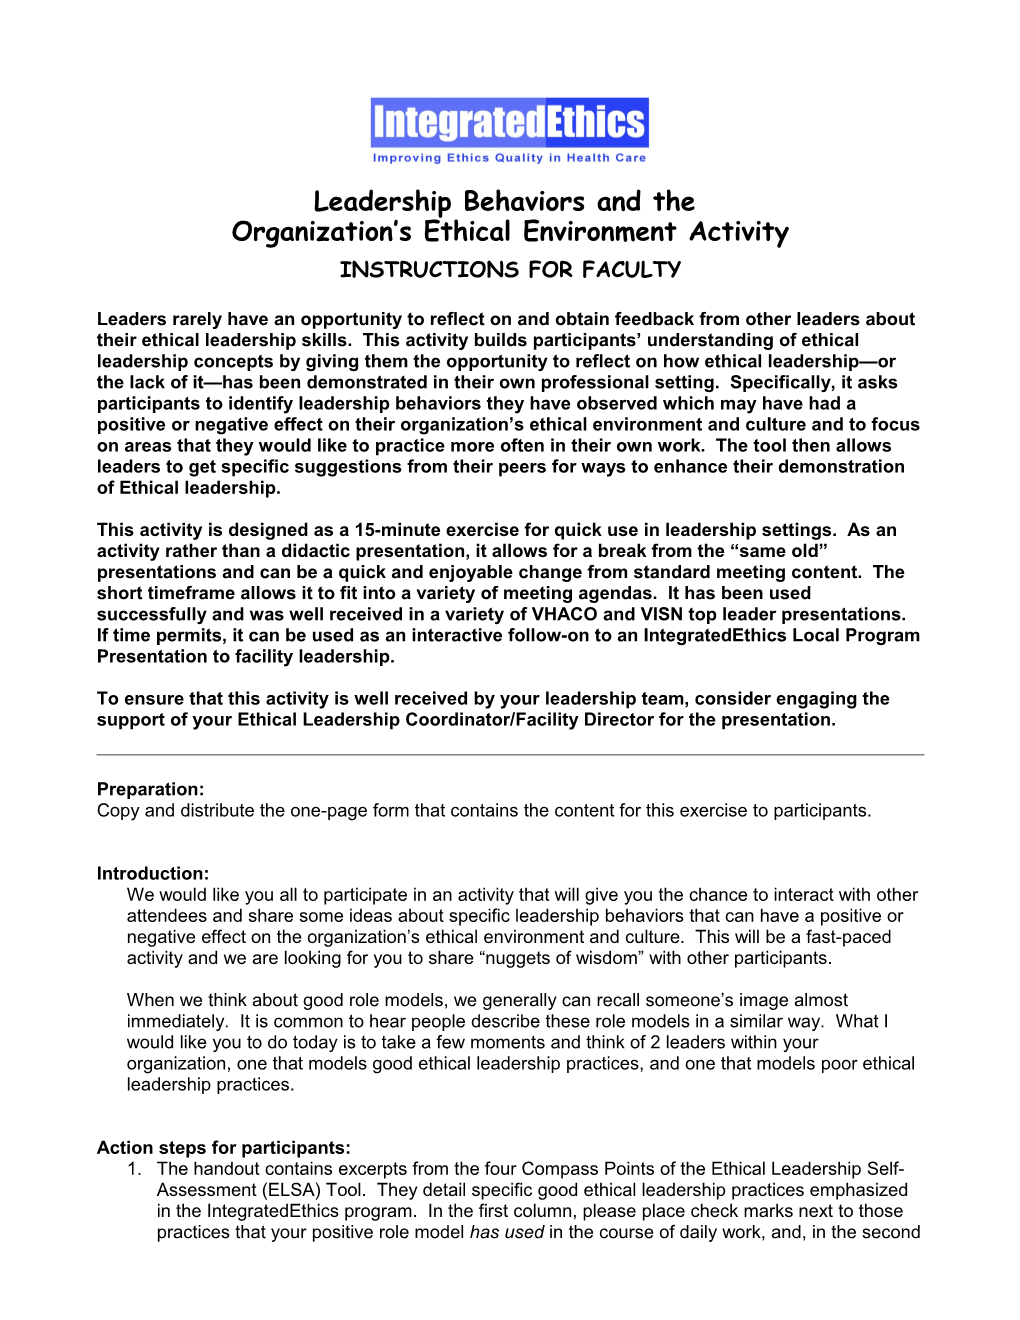 Leadership Behaviors and the Organization S Ethical Environment - US Department of Veterans